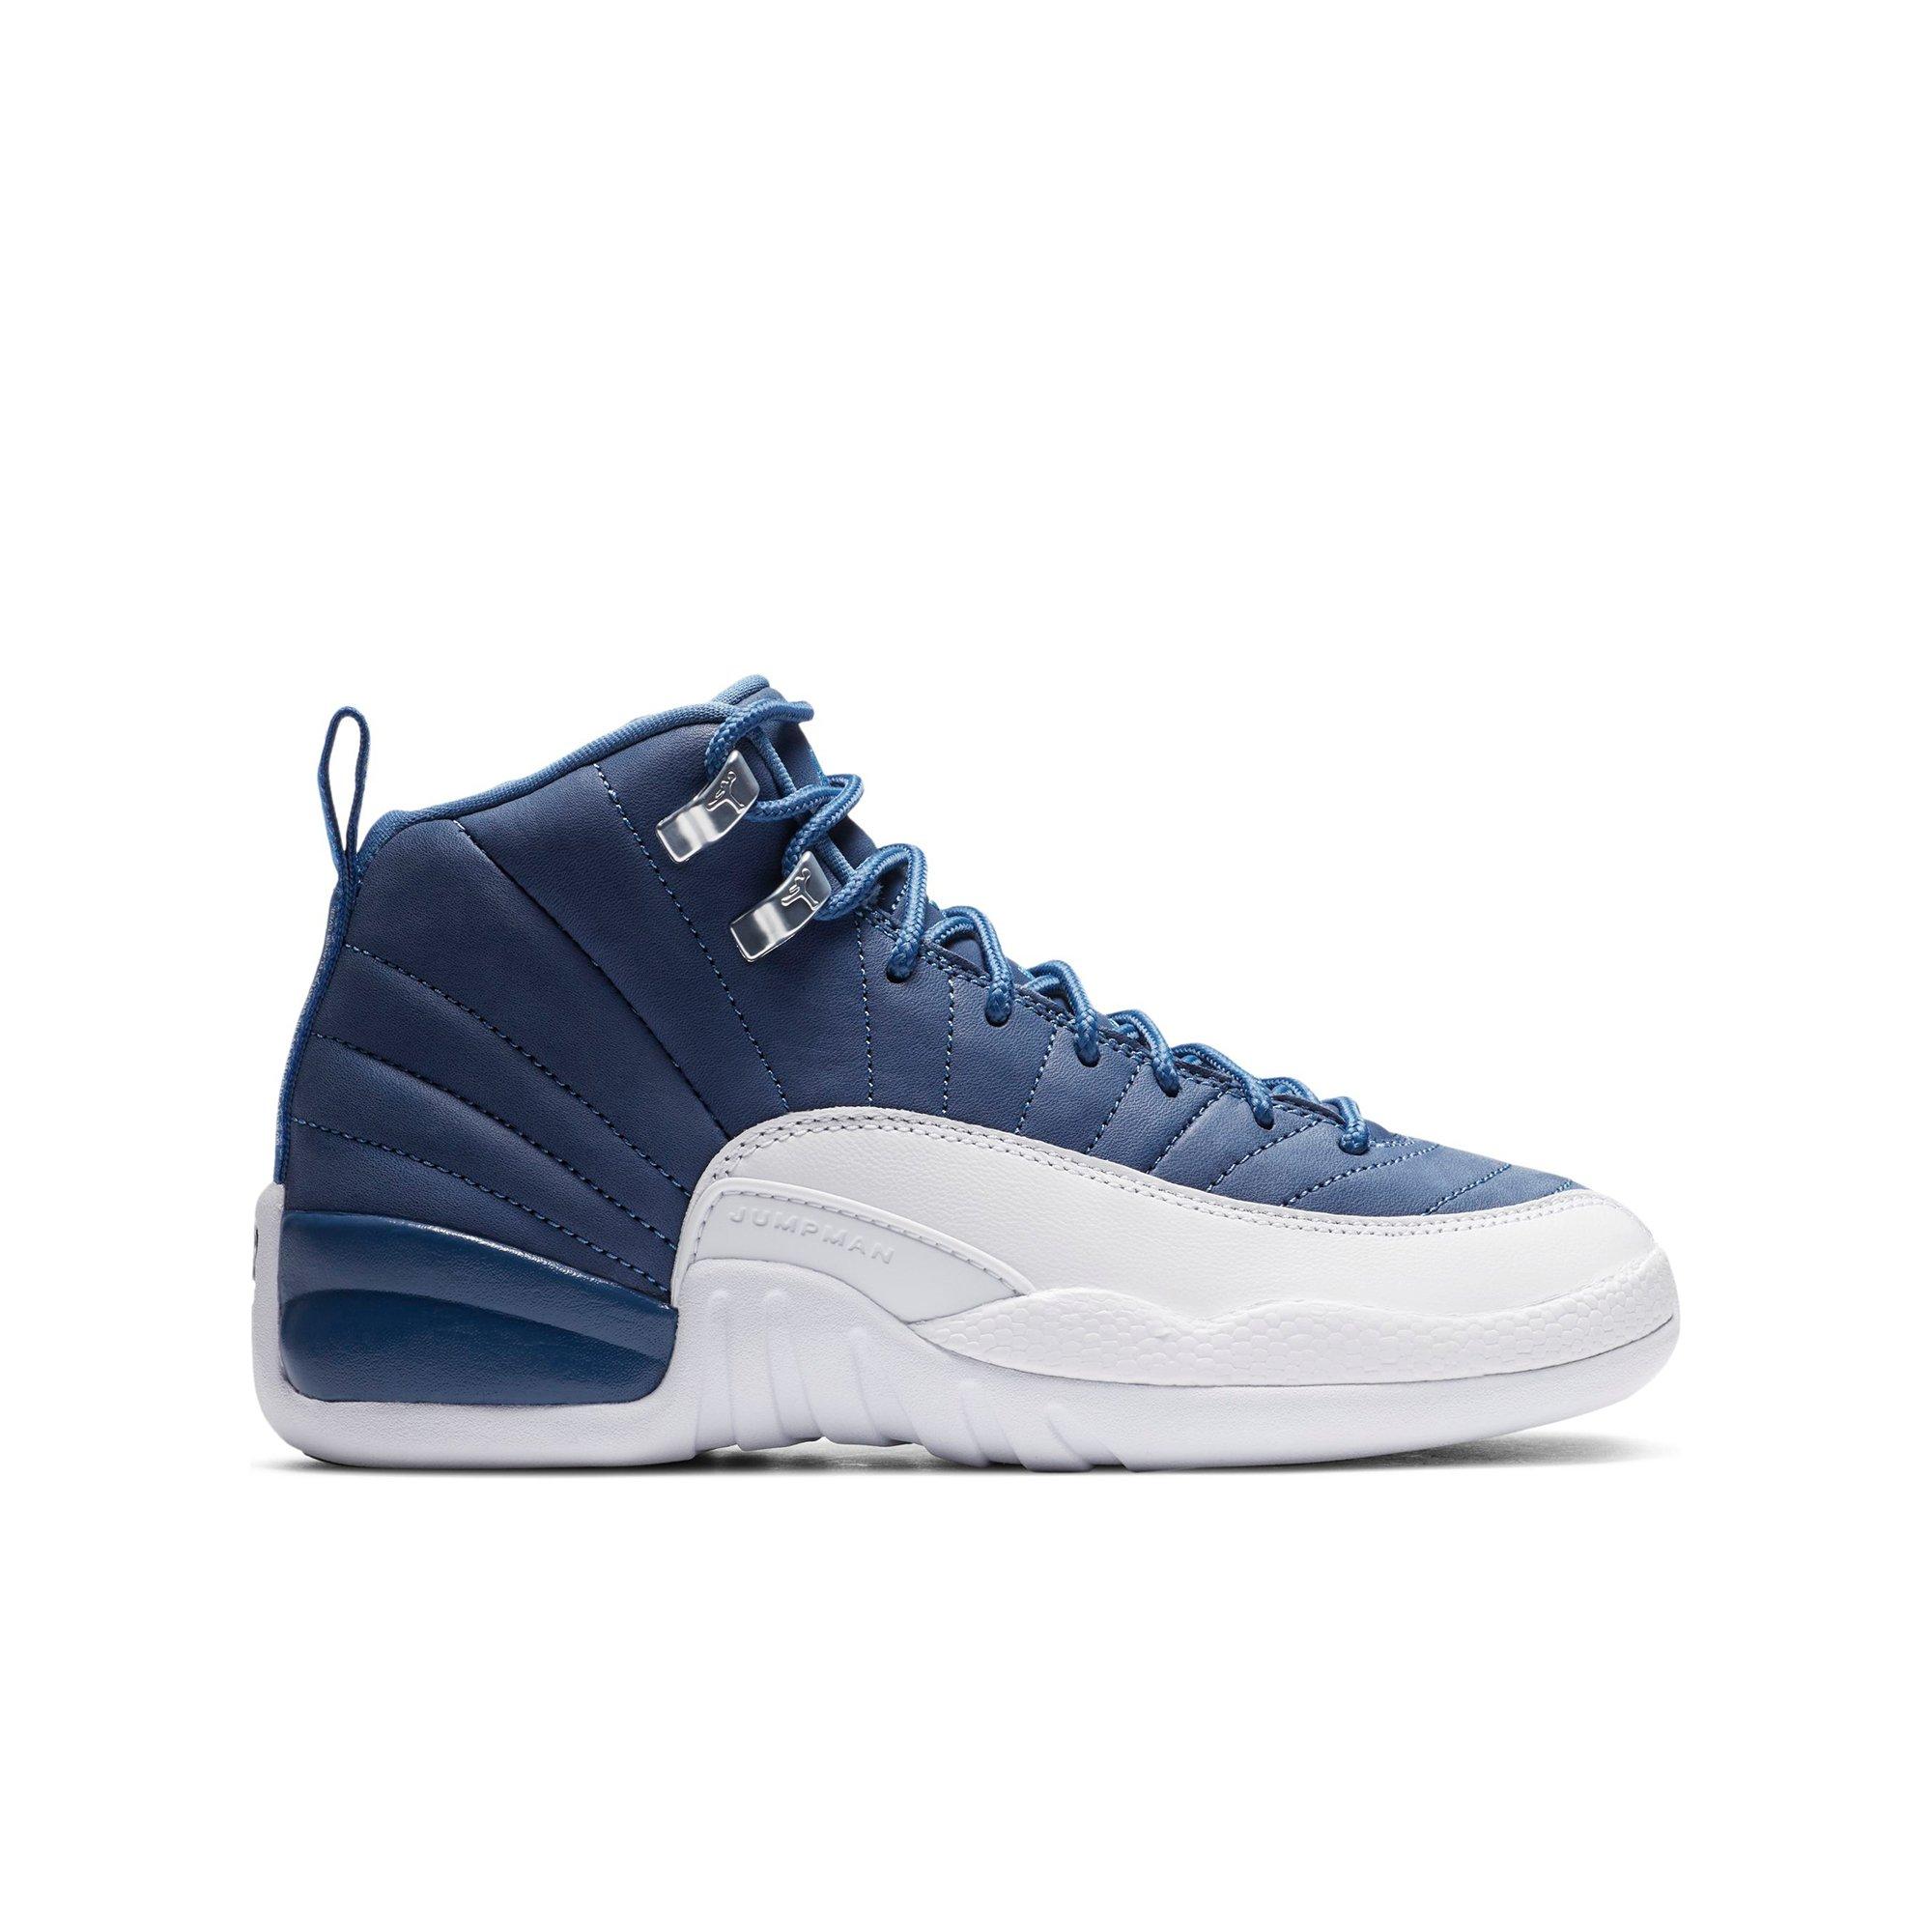 blue and black 12s kids